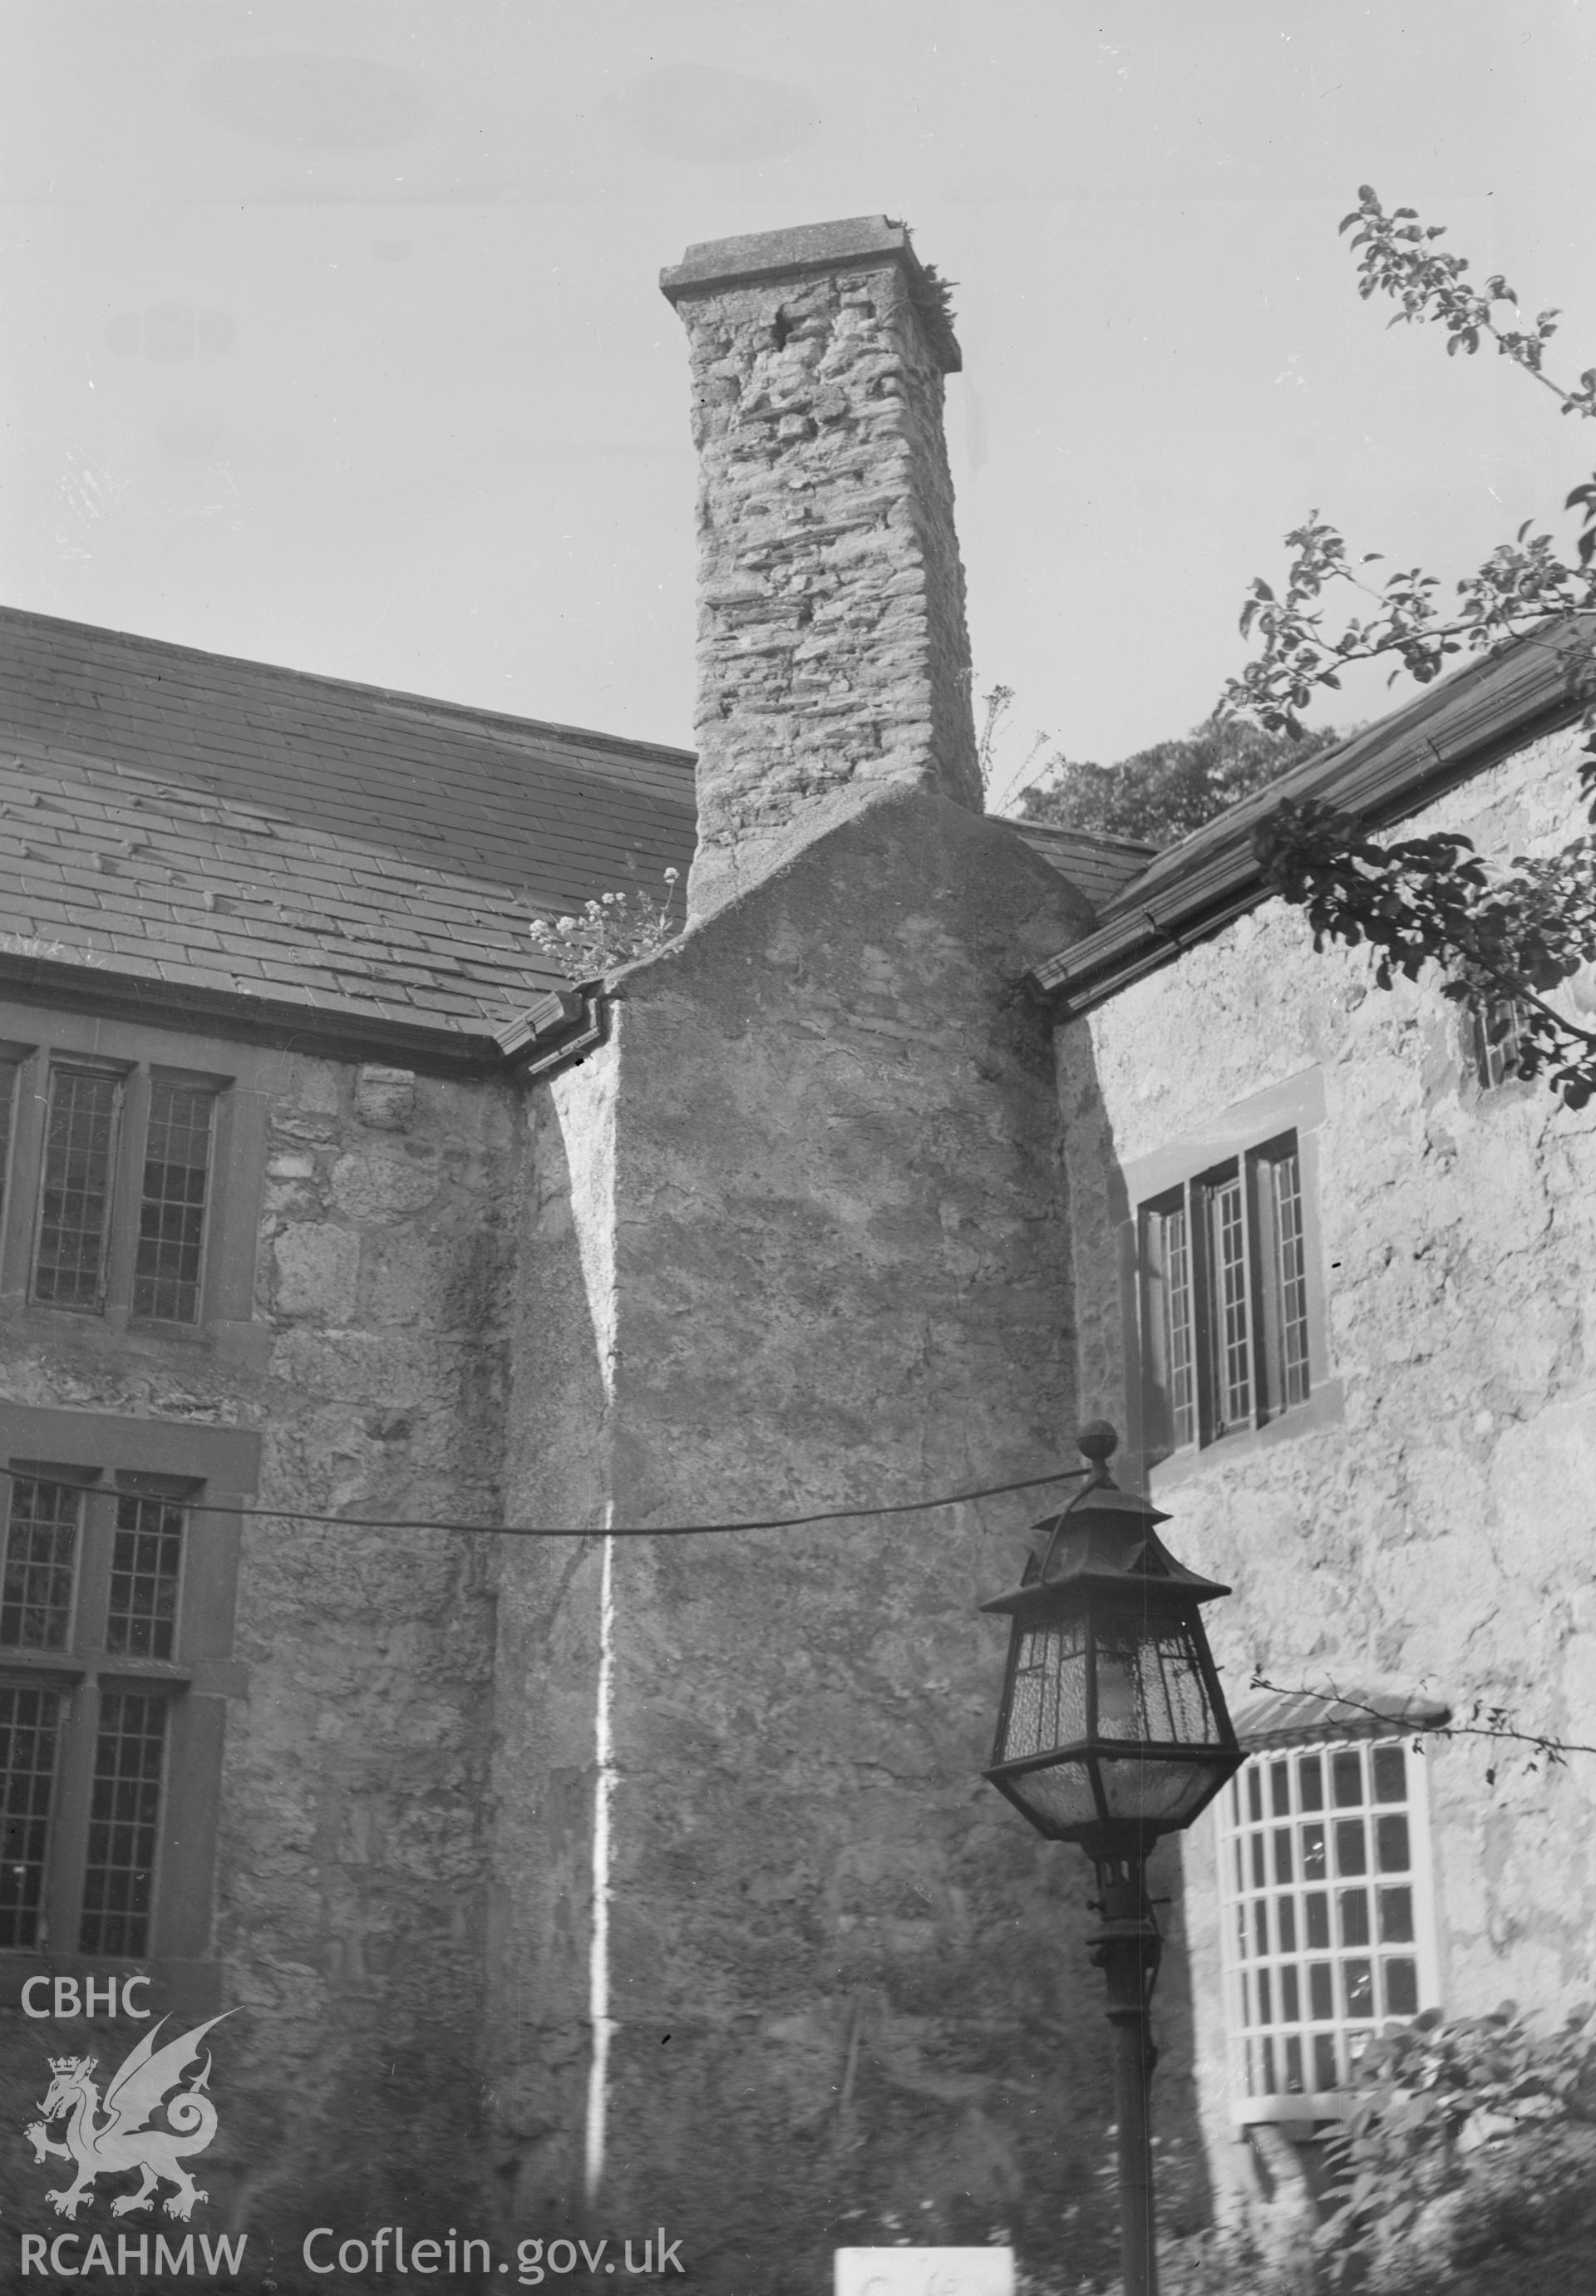 Exterior view showing the chimney.